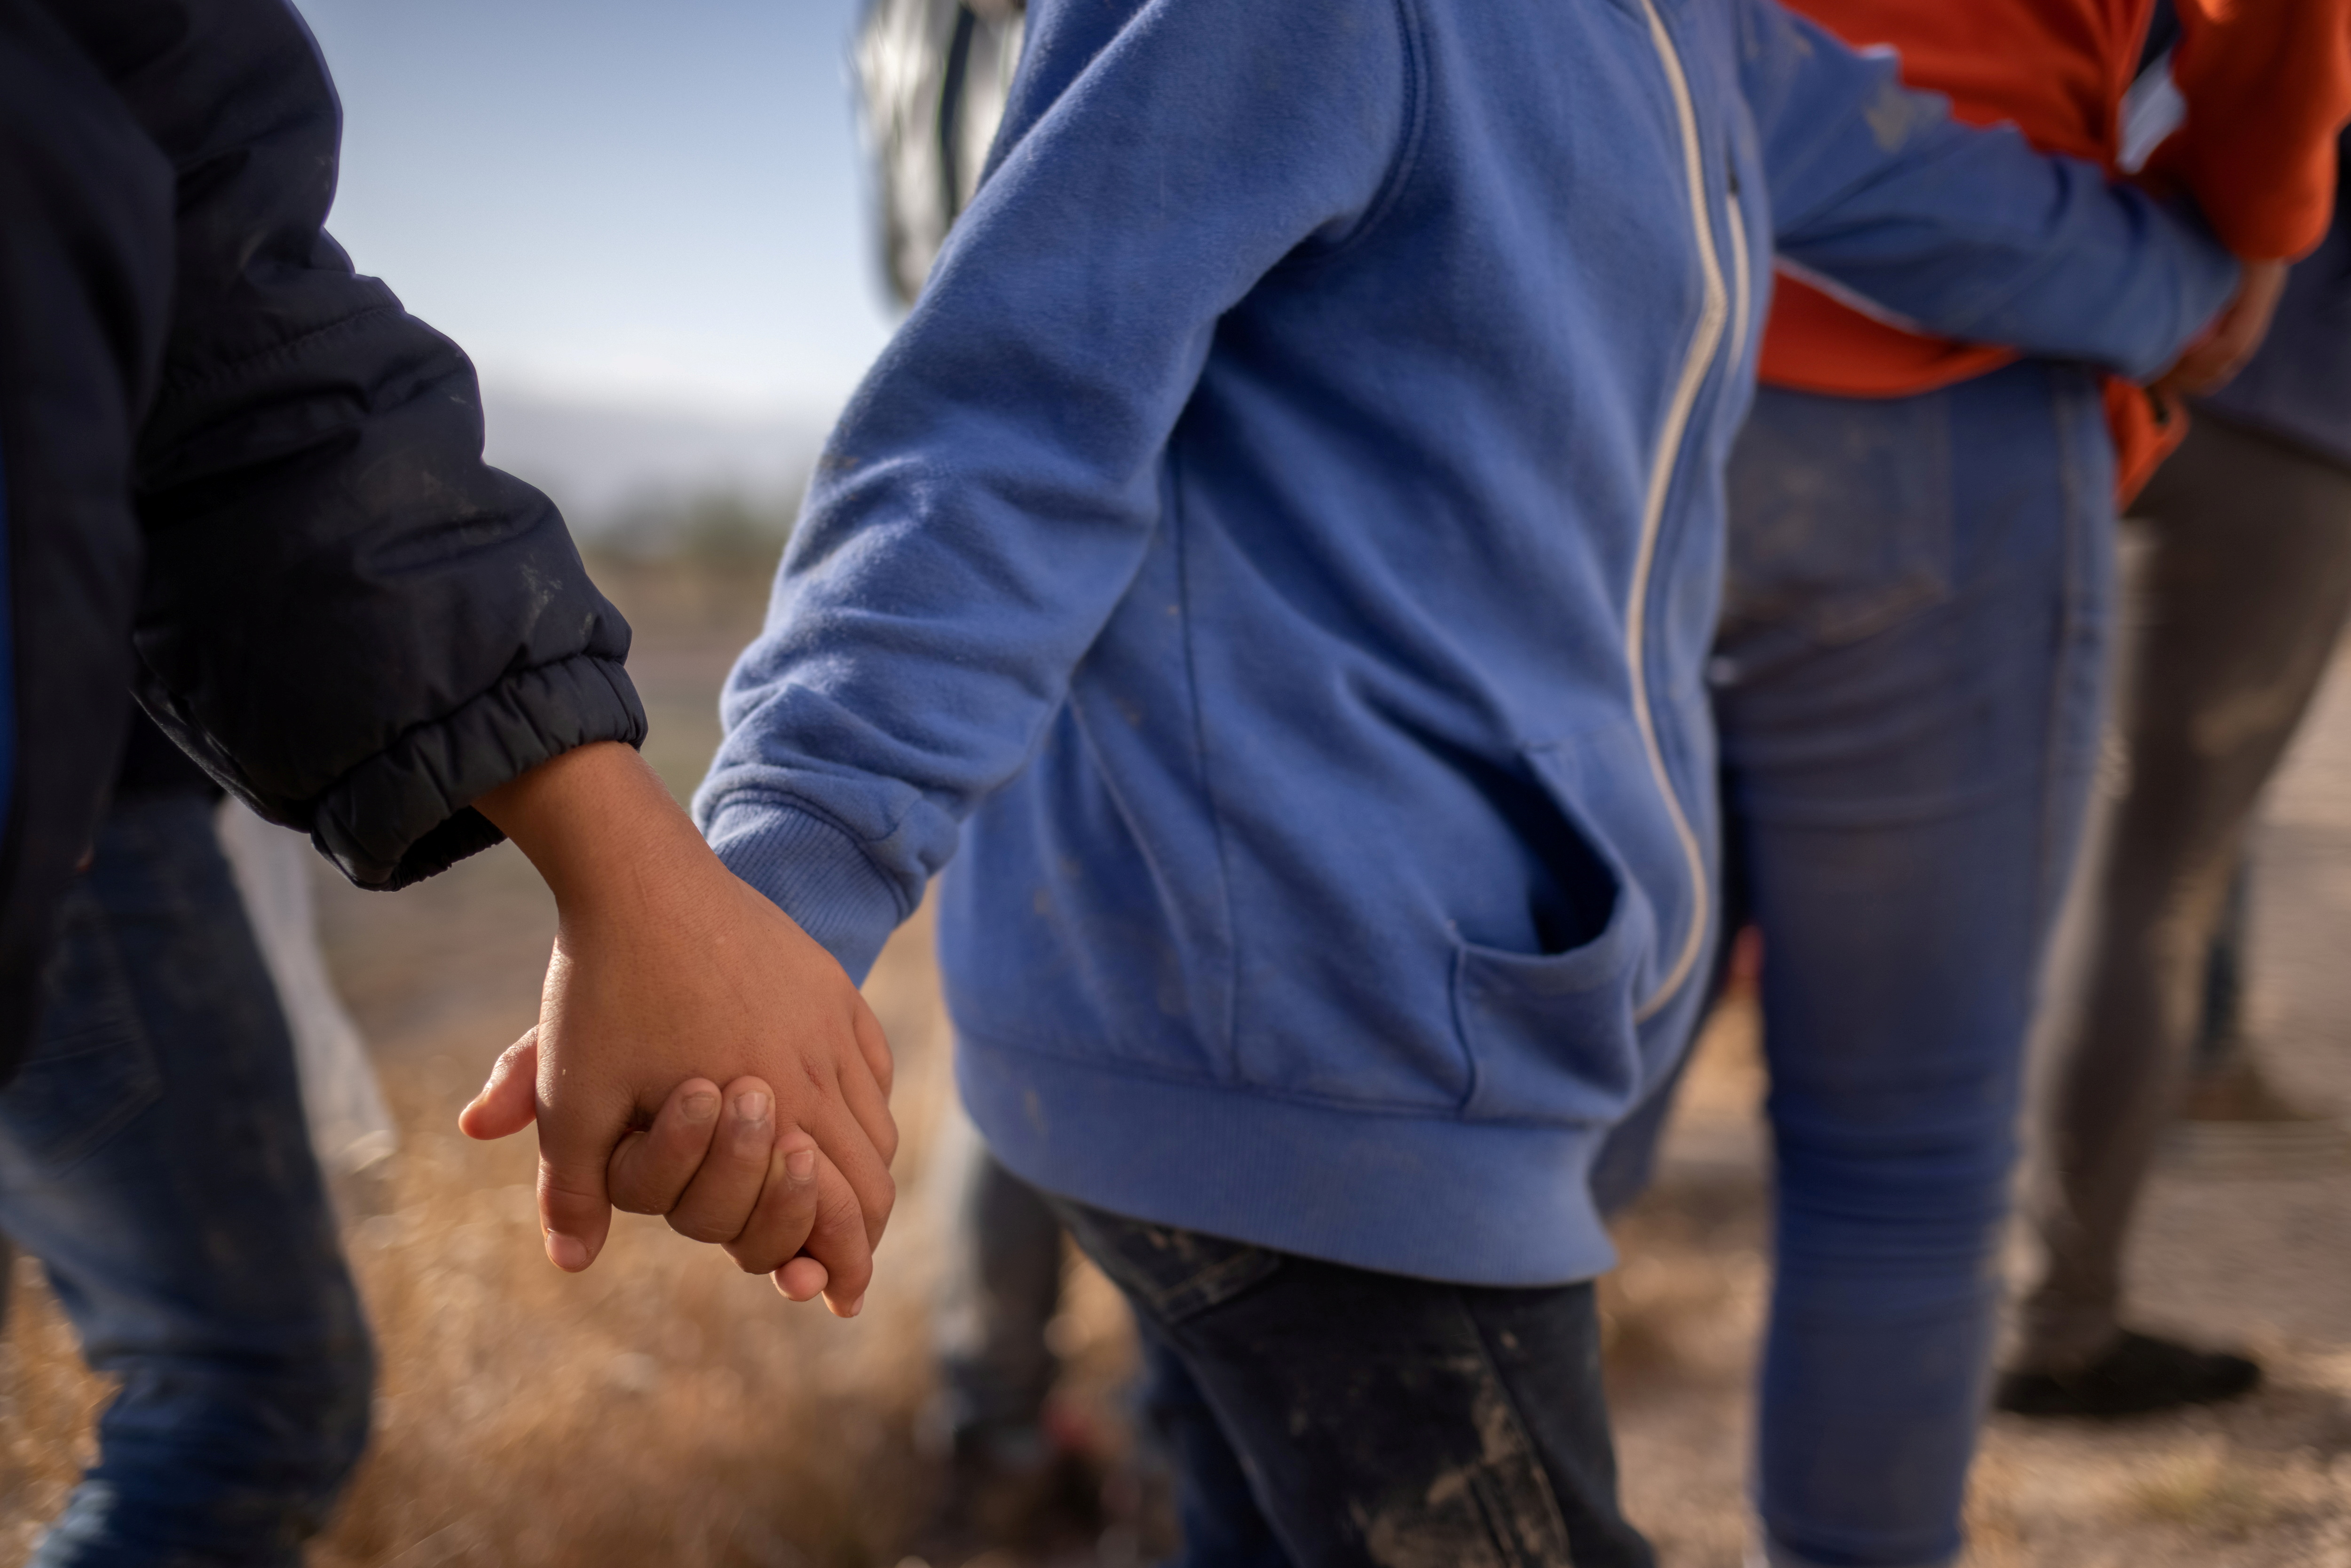 Asylum seeking unaccompanied minors hold hands amid adult migrants from Central America as they await transport in Penitas, Texas